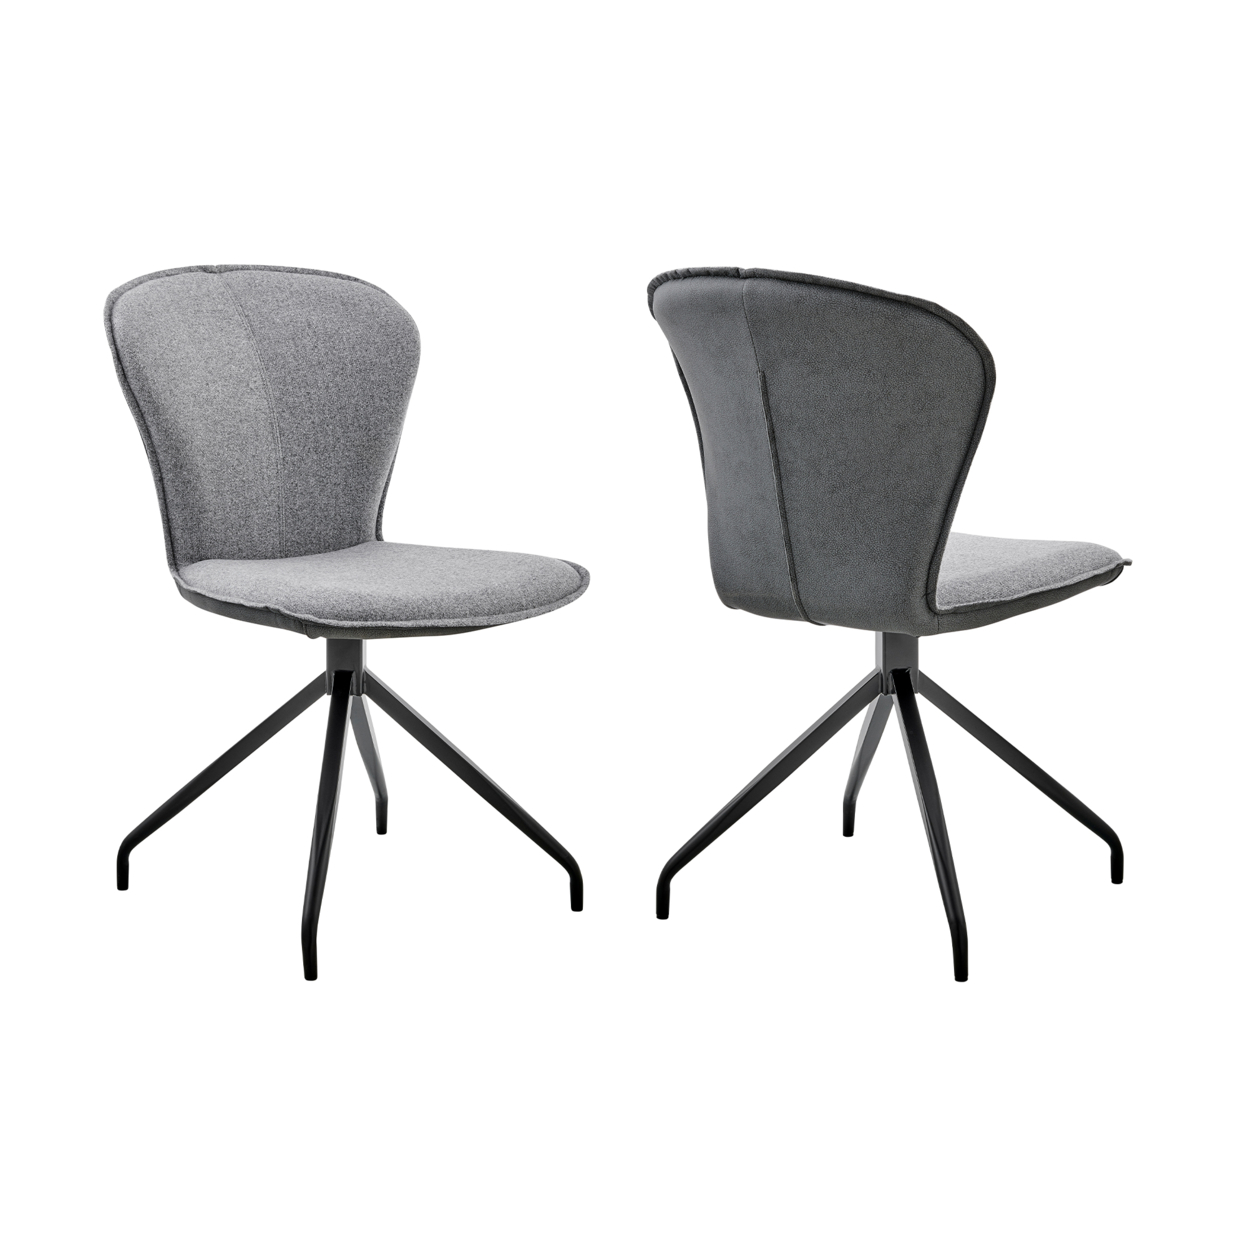 Dining Chair With Wide Back And Seat, Set Of 2, Gray And Black- Saltoro Sherpi